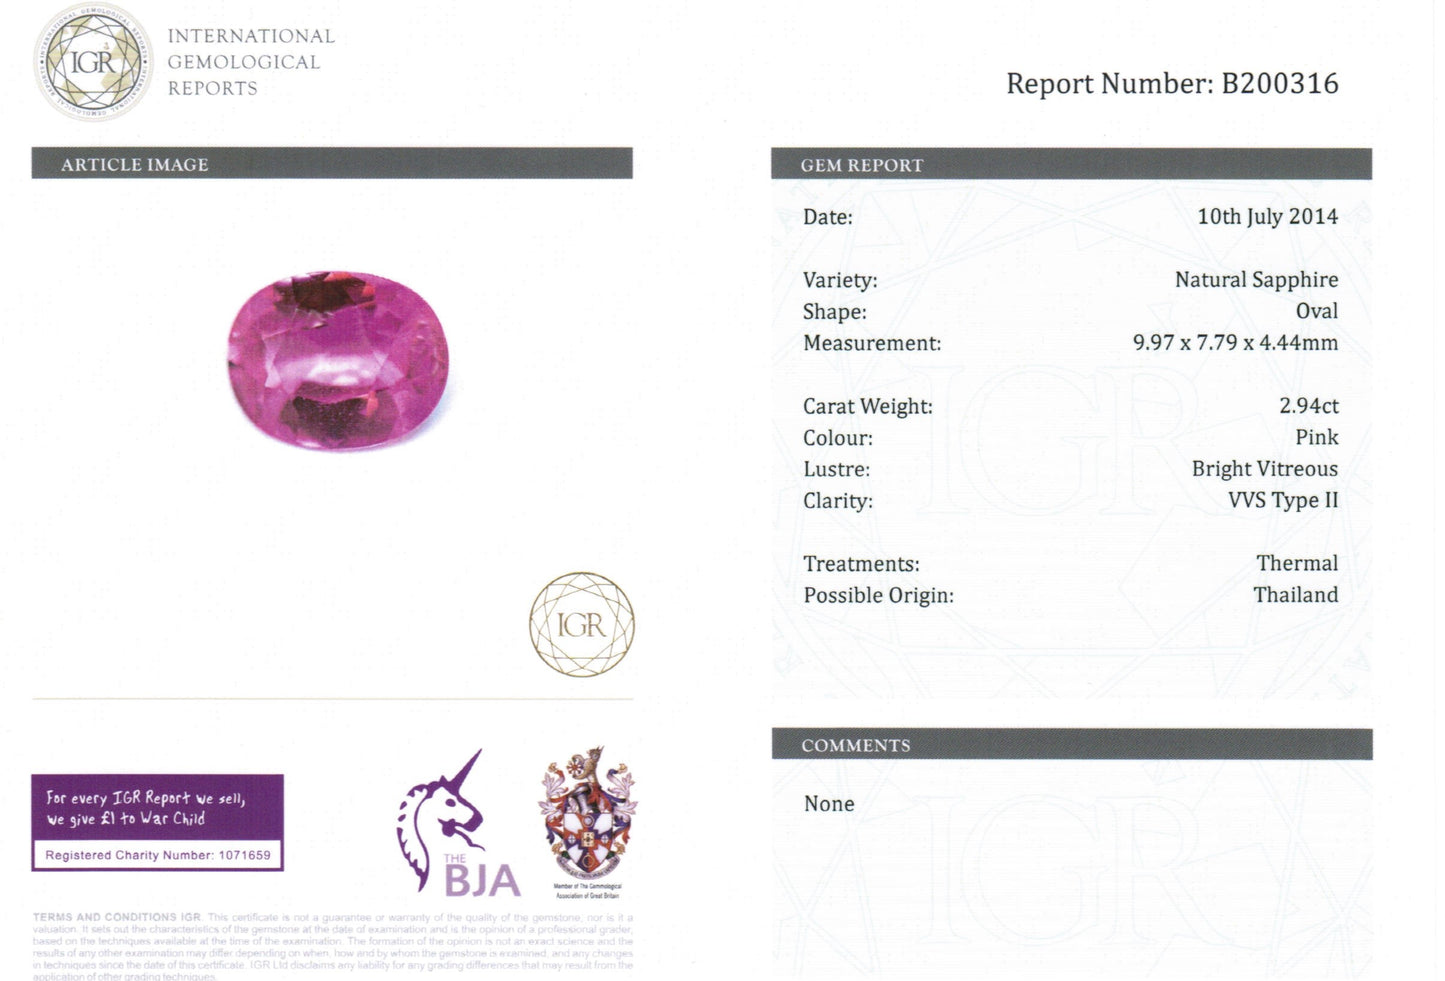 2.94ct Pink, Oval Sapphire, Heated, Thailand - 9.97 x 7.79 x 4.44mm